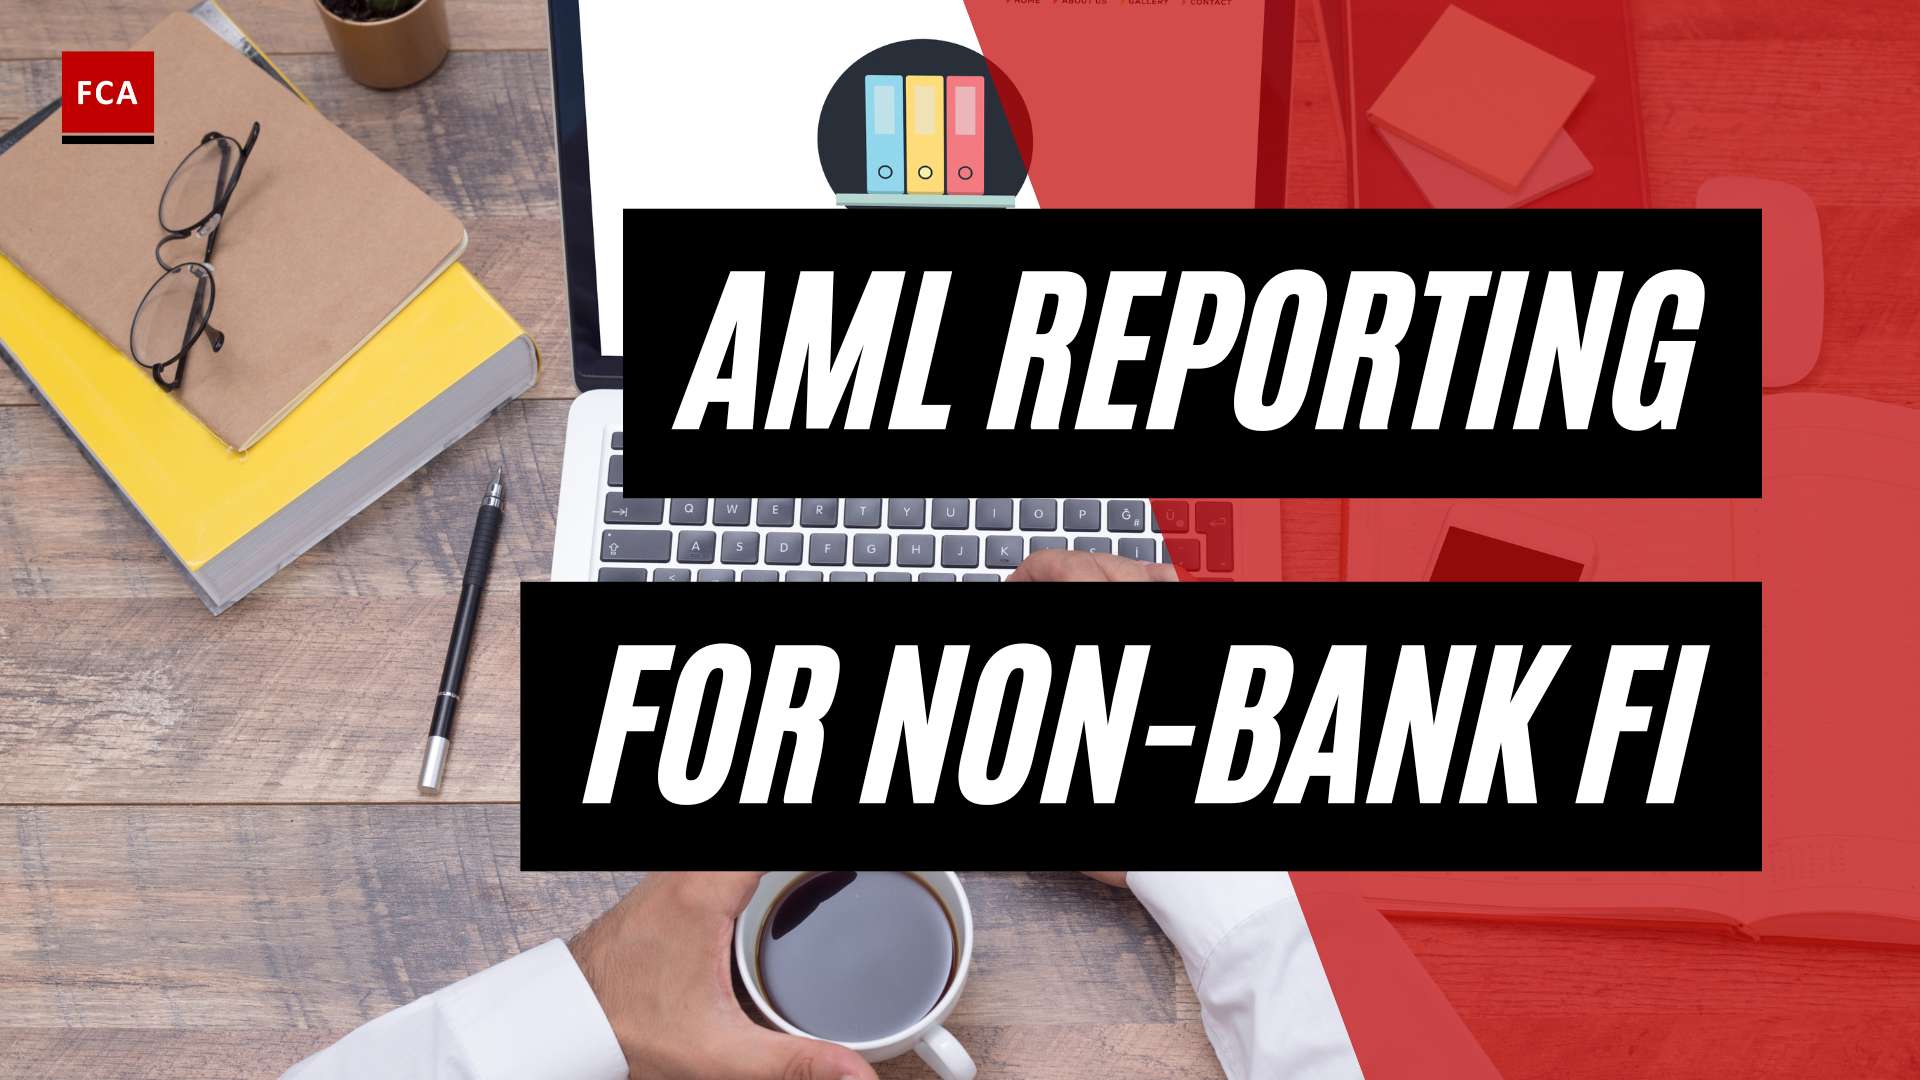 Demystifying Aml Reporting: Best Practices For Non-Bank Financial Institutions